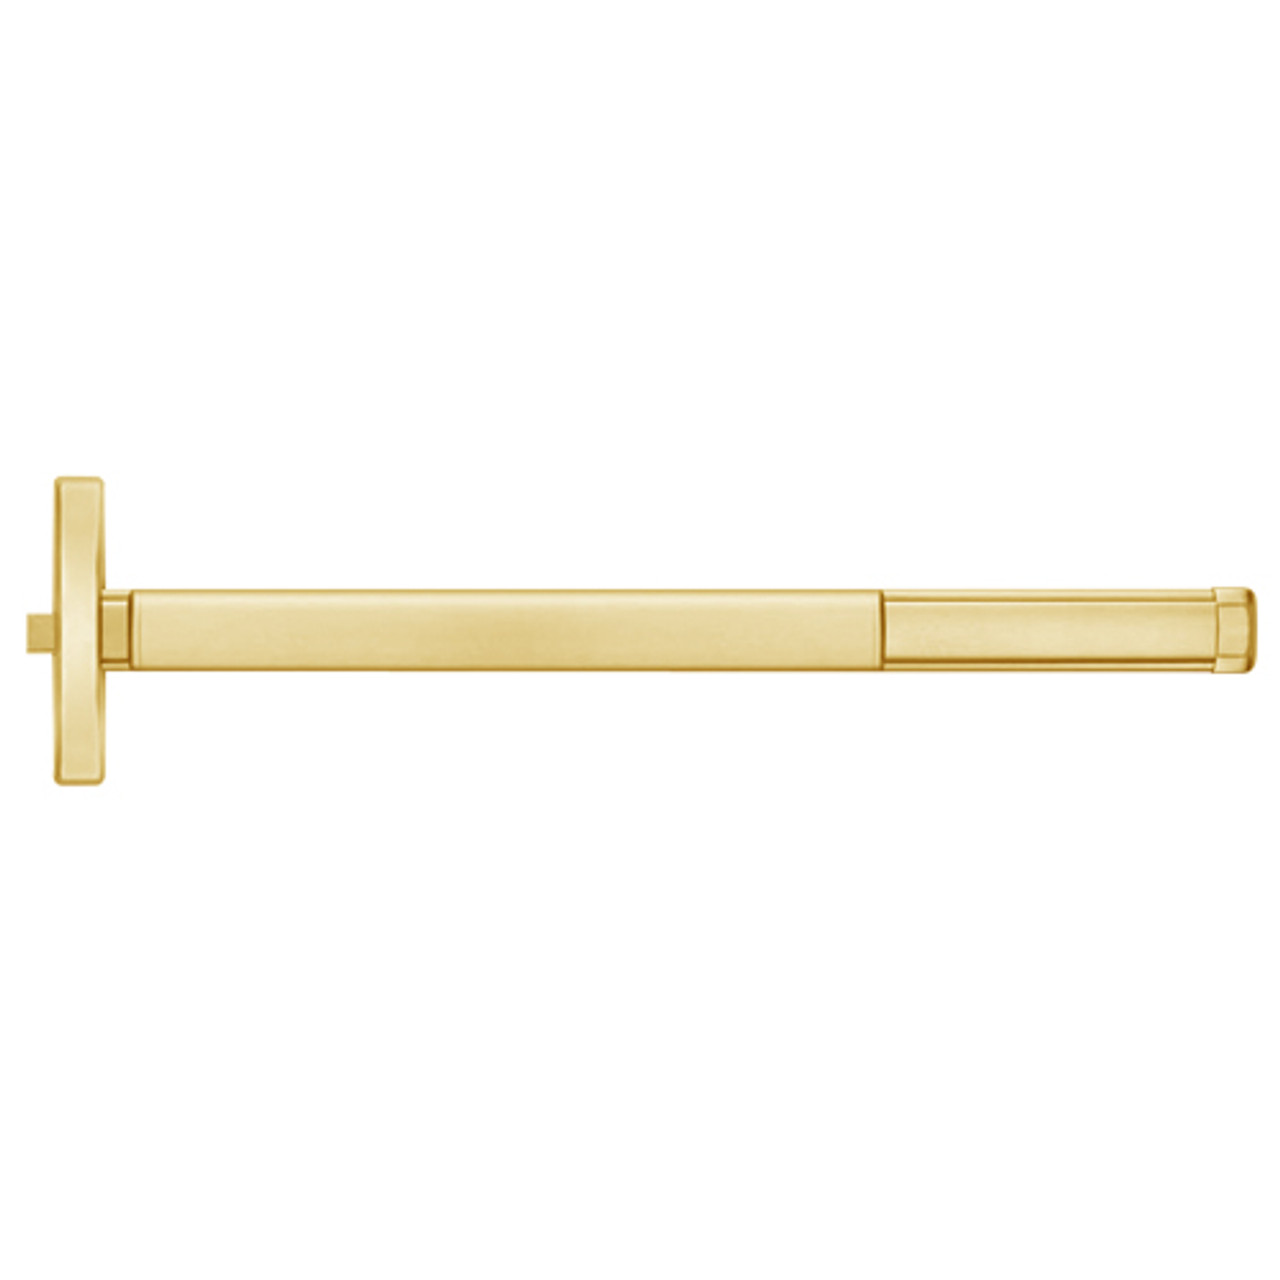 FL2403-605-48 PHI 2400 Series Fire Rated Apex Rim Exit Device Prepped for Key Retracts Latchbolt in Bright Brass Finish